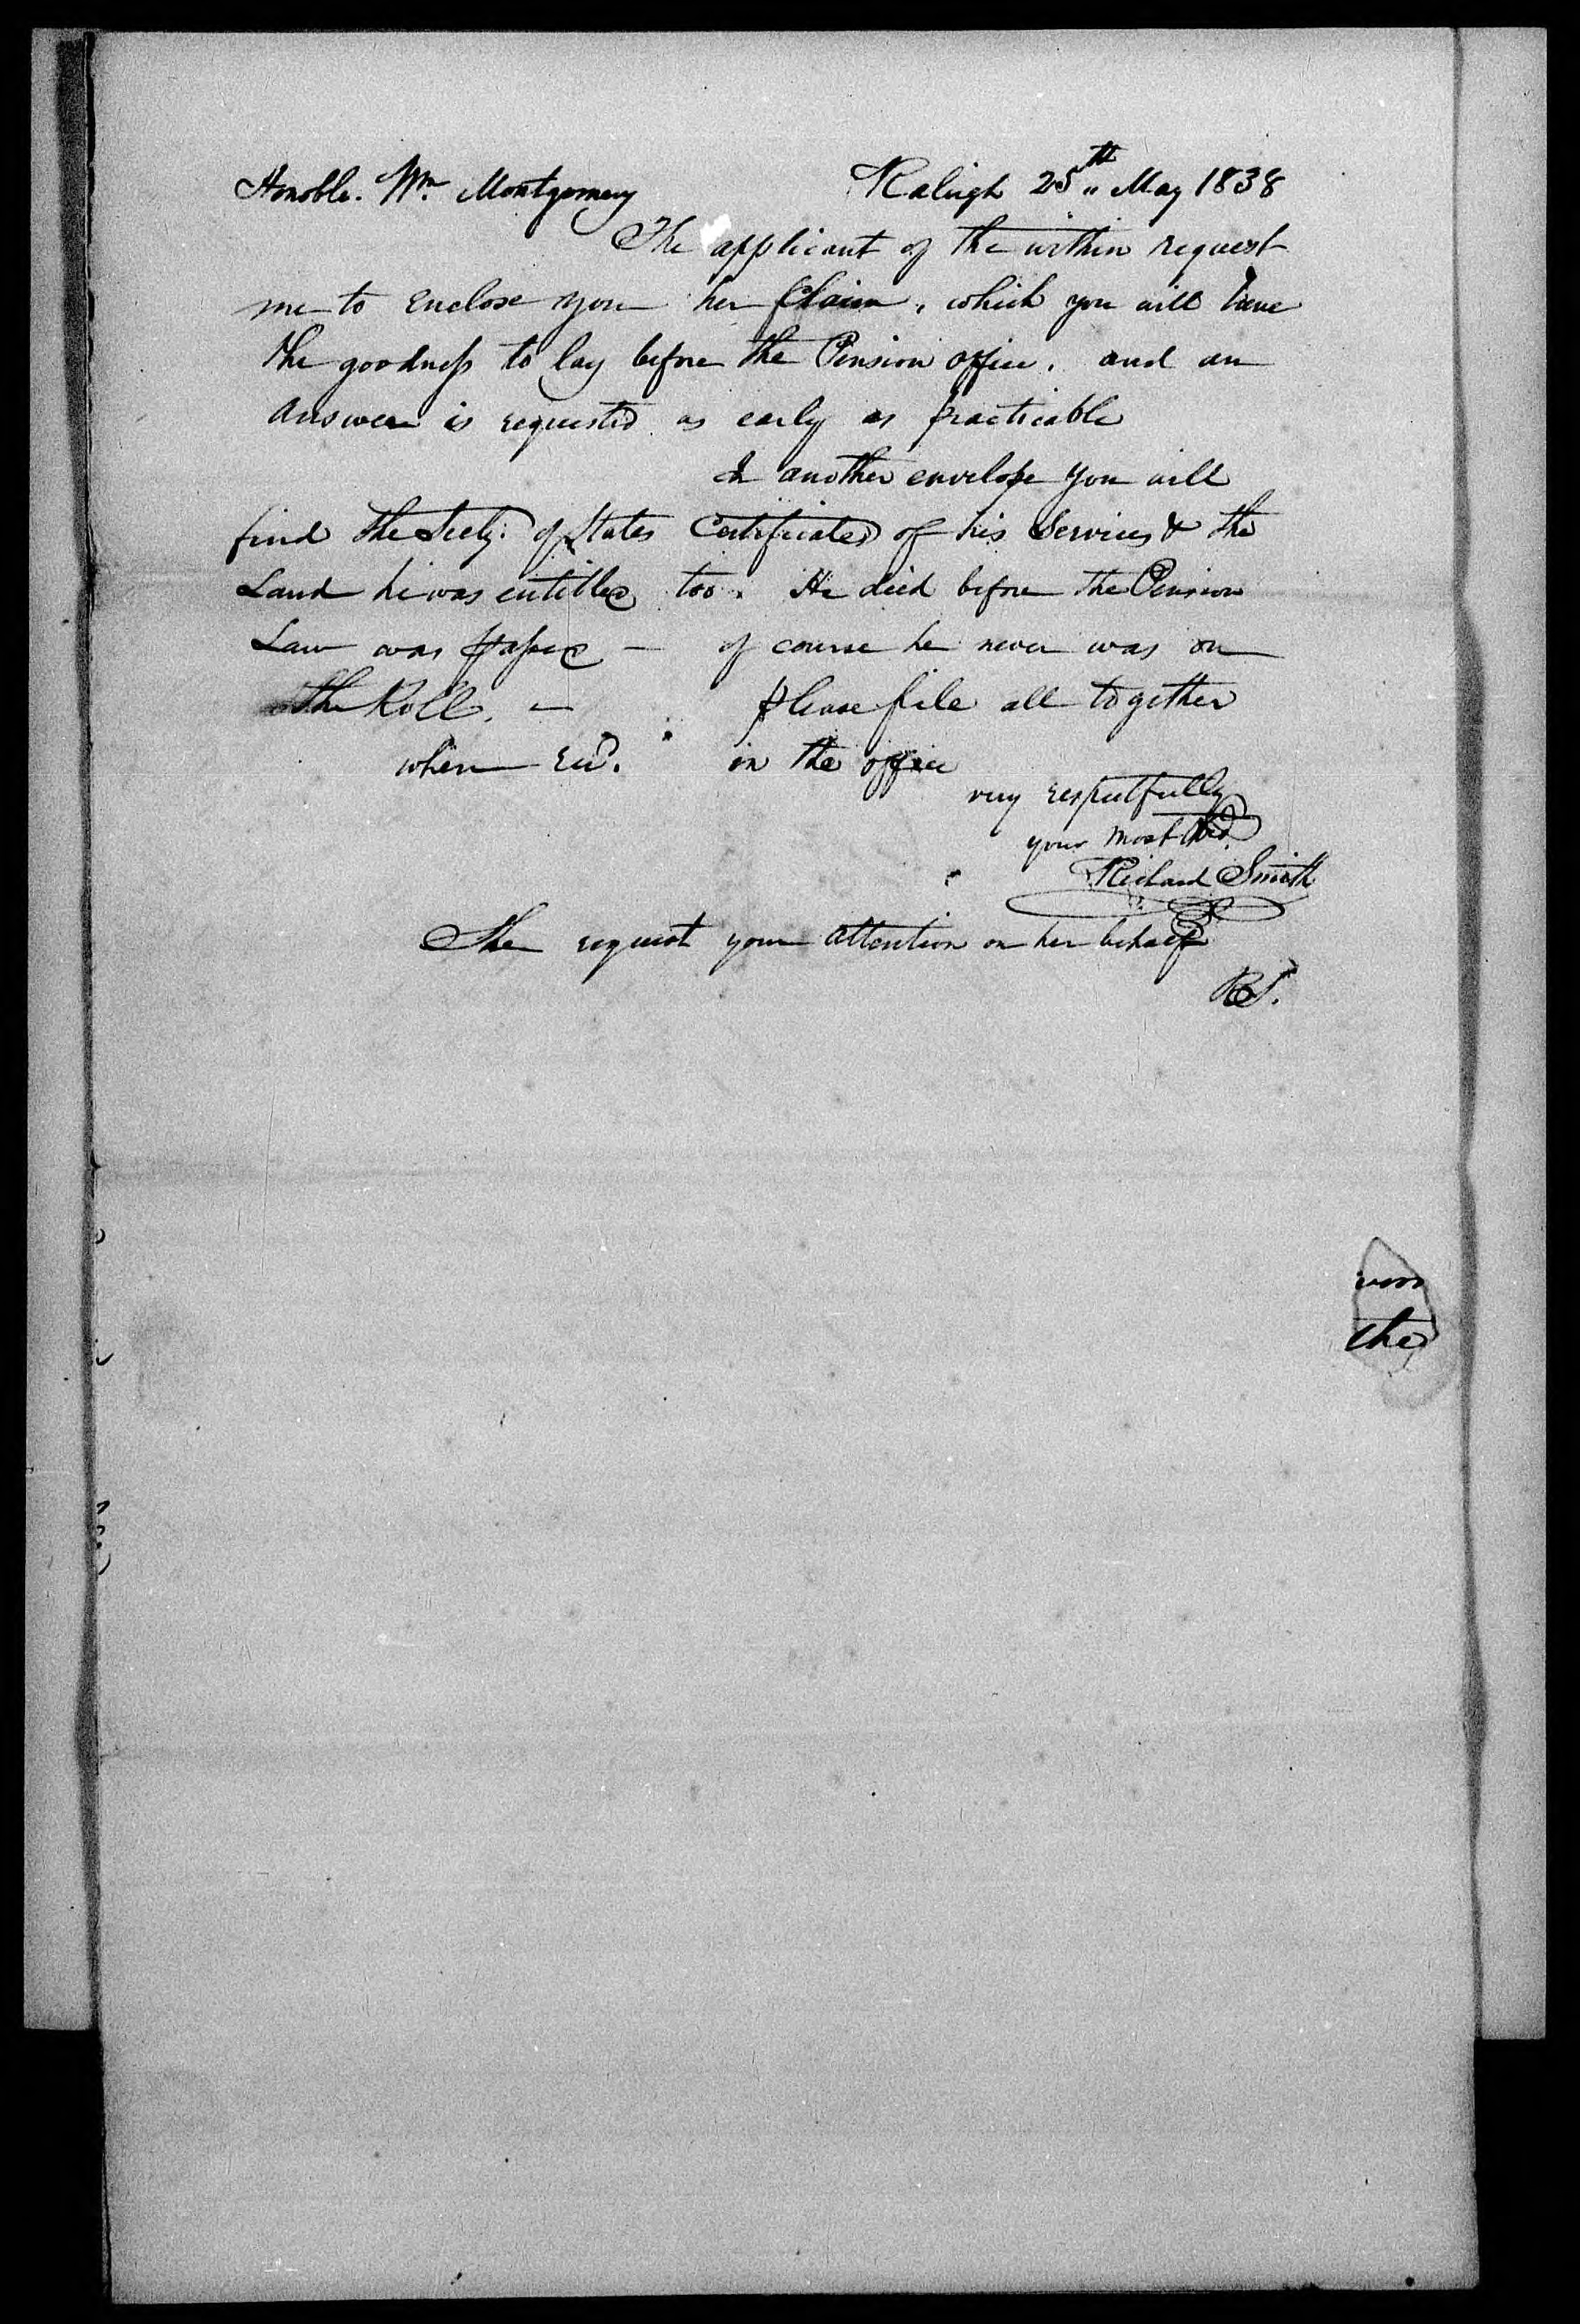 Letter from Richard Smith to William Montgomery, 25 May 1838, page 1